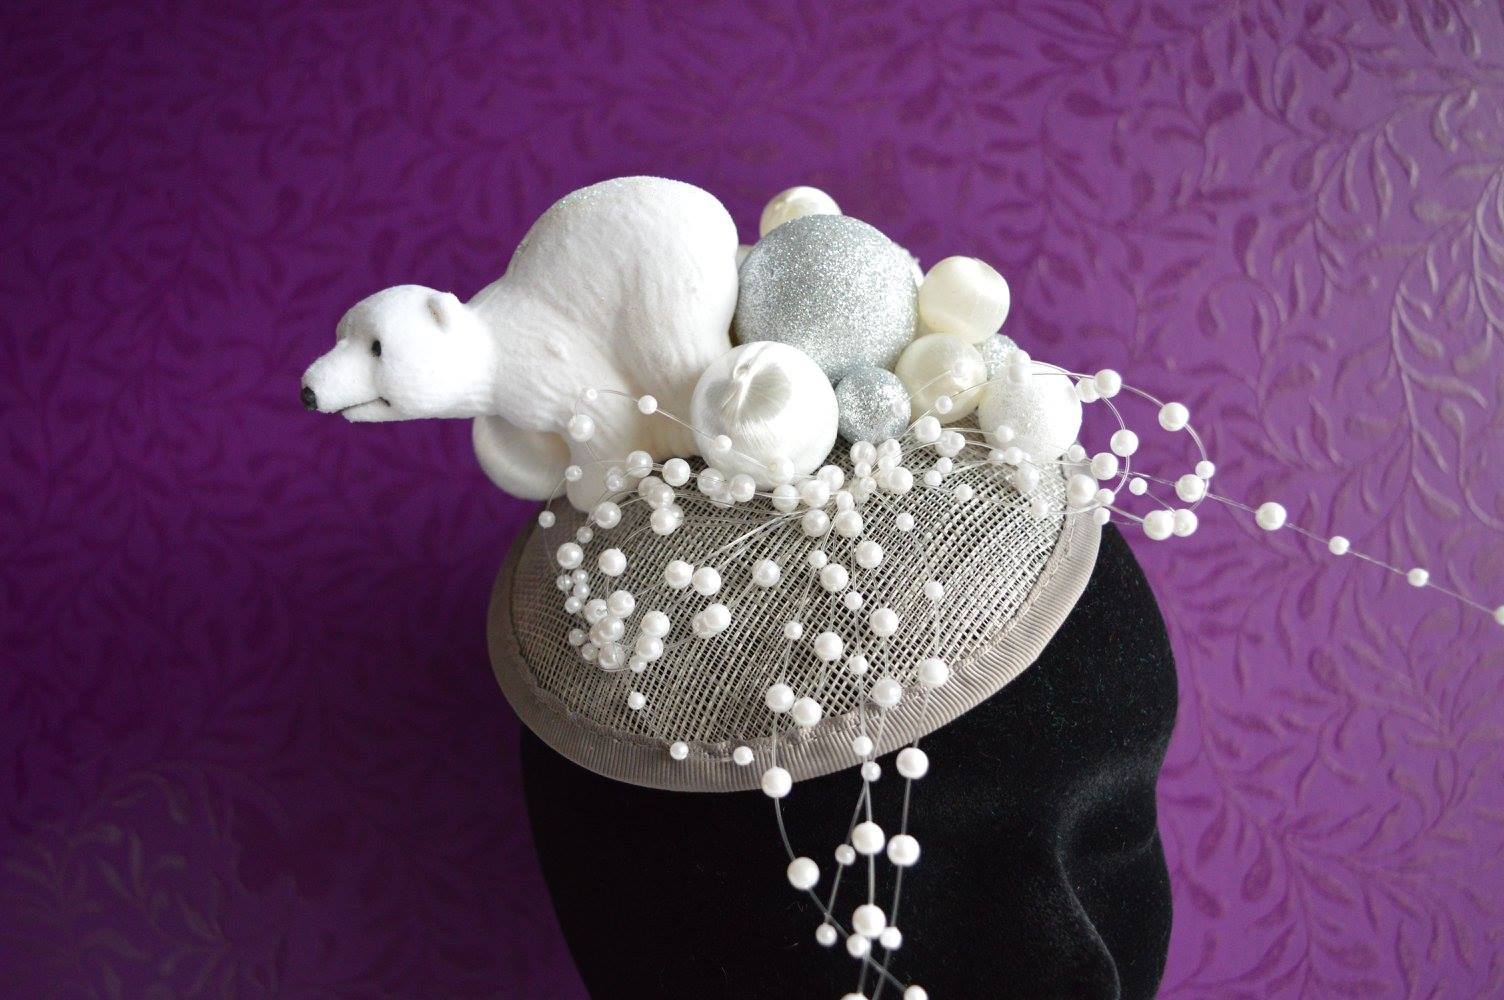 IMAGE - Silver sinemay fascinator with polar bear and silver and white spheres, decorated with strings of pearls. Fixes to hair with a comb.